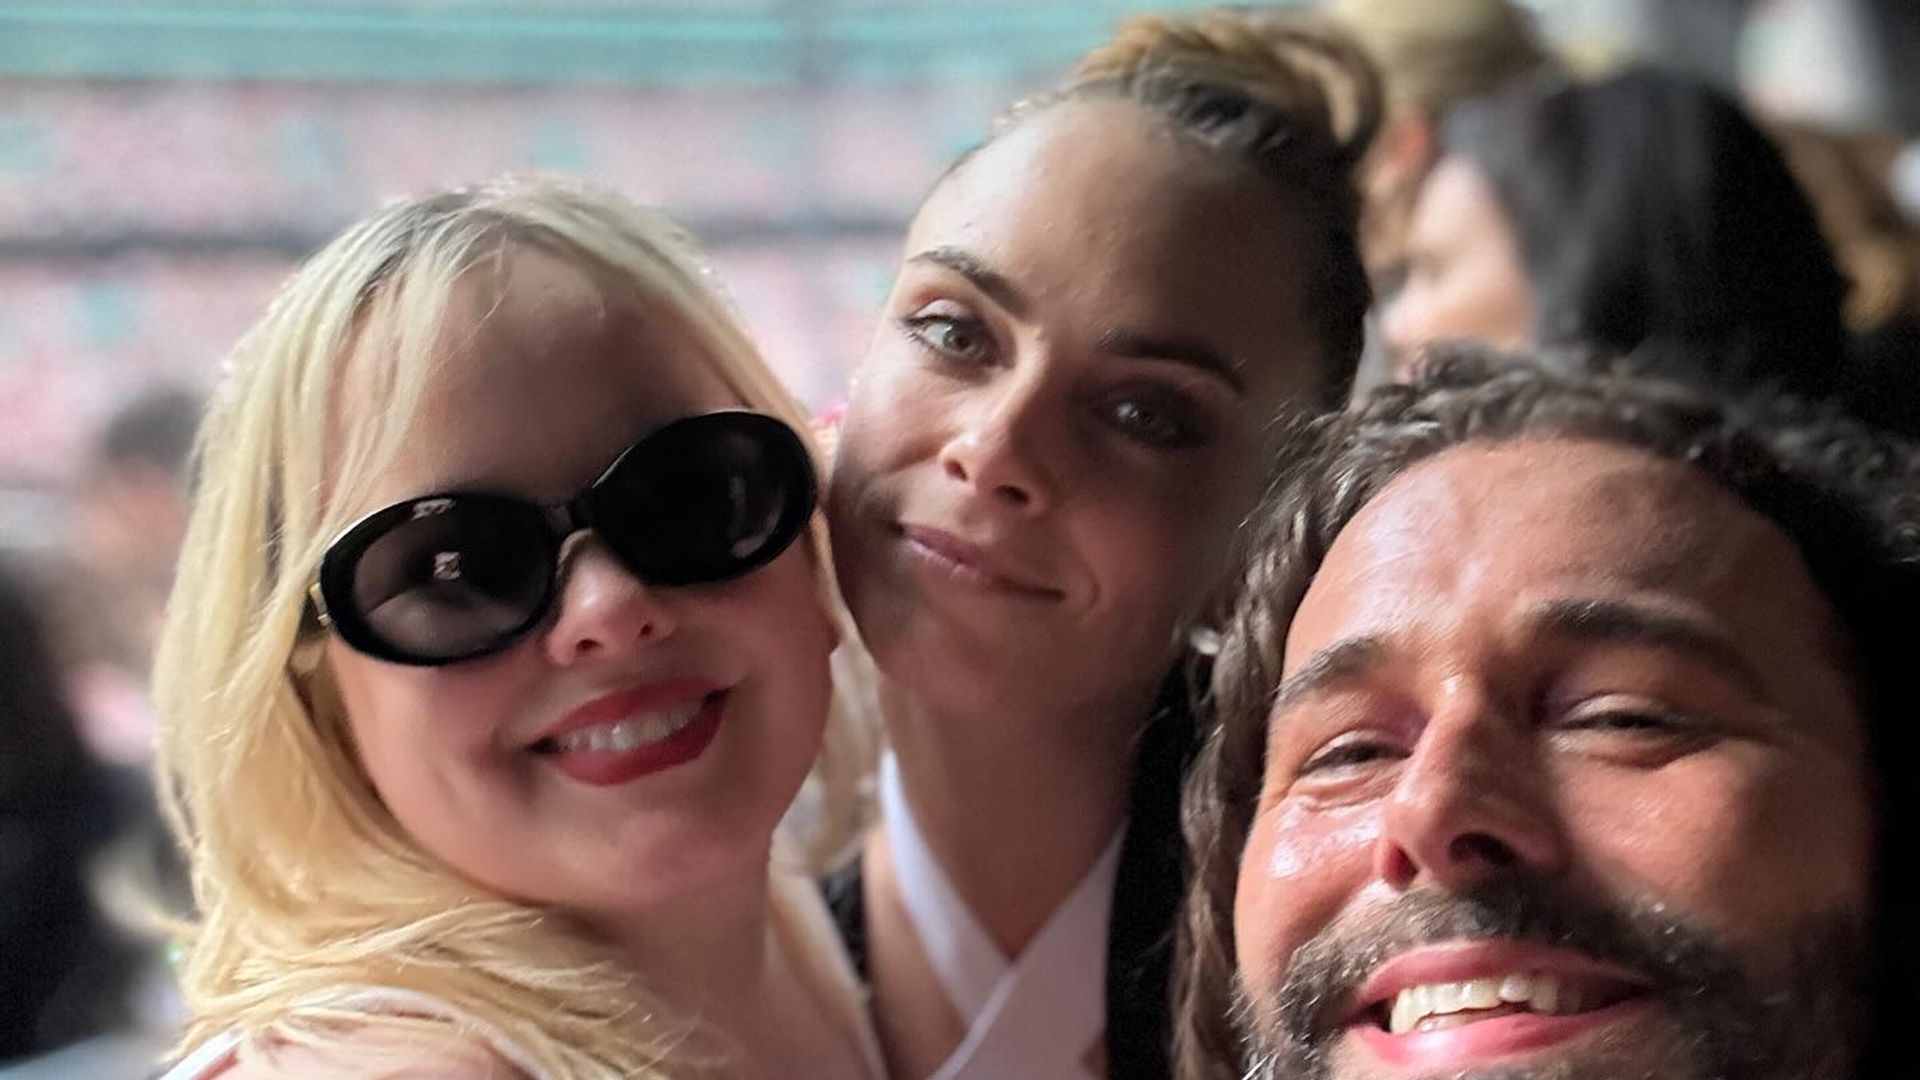 Cara was pictured enjoying Taylor's first night in Wembley alongside  Nicola Coughlan and Jon Van Ness